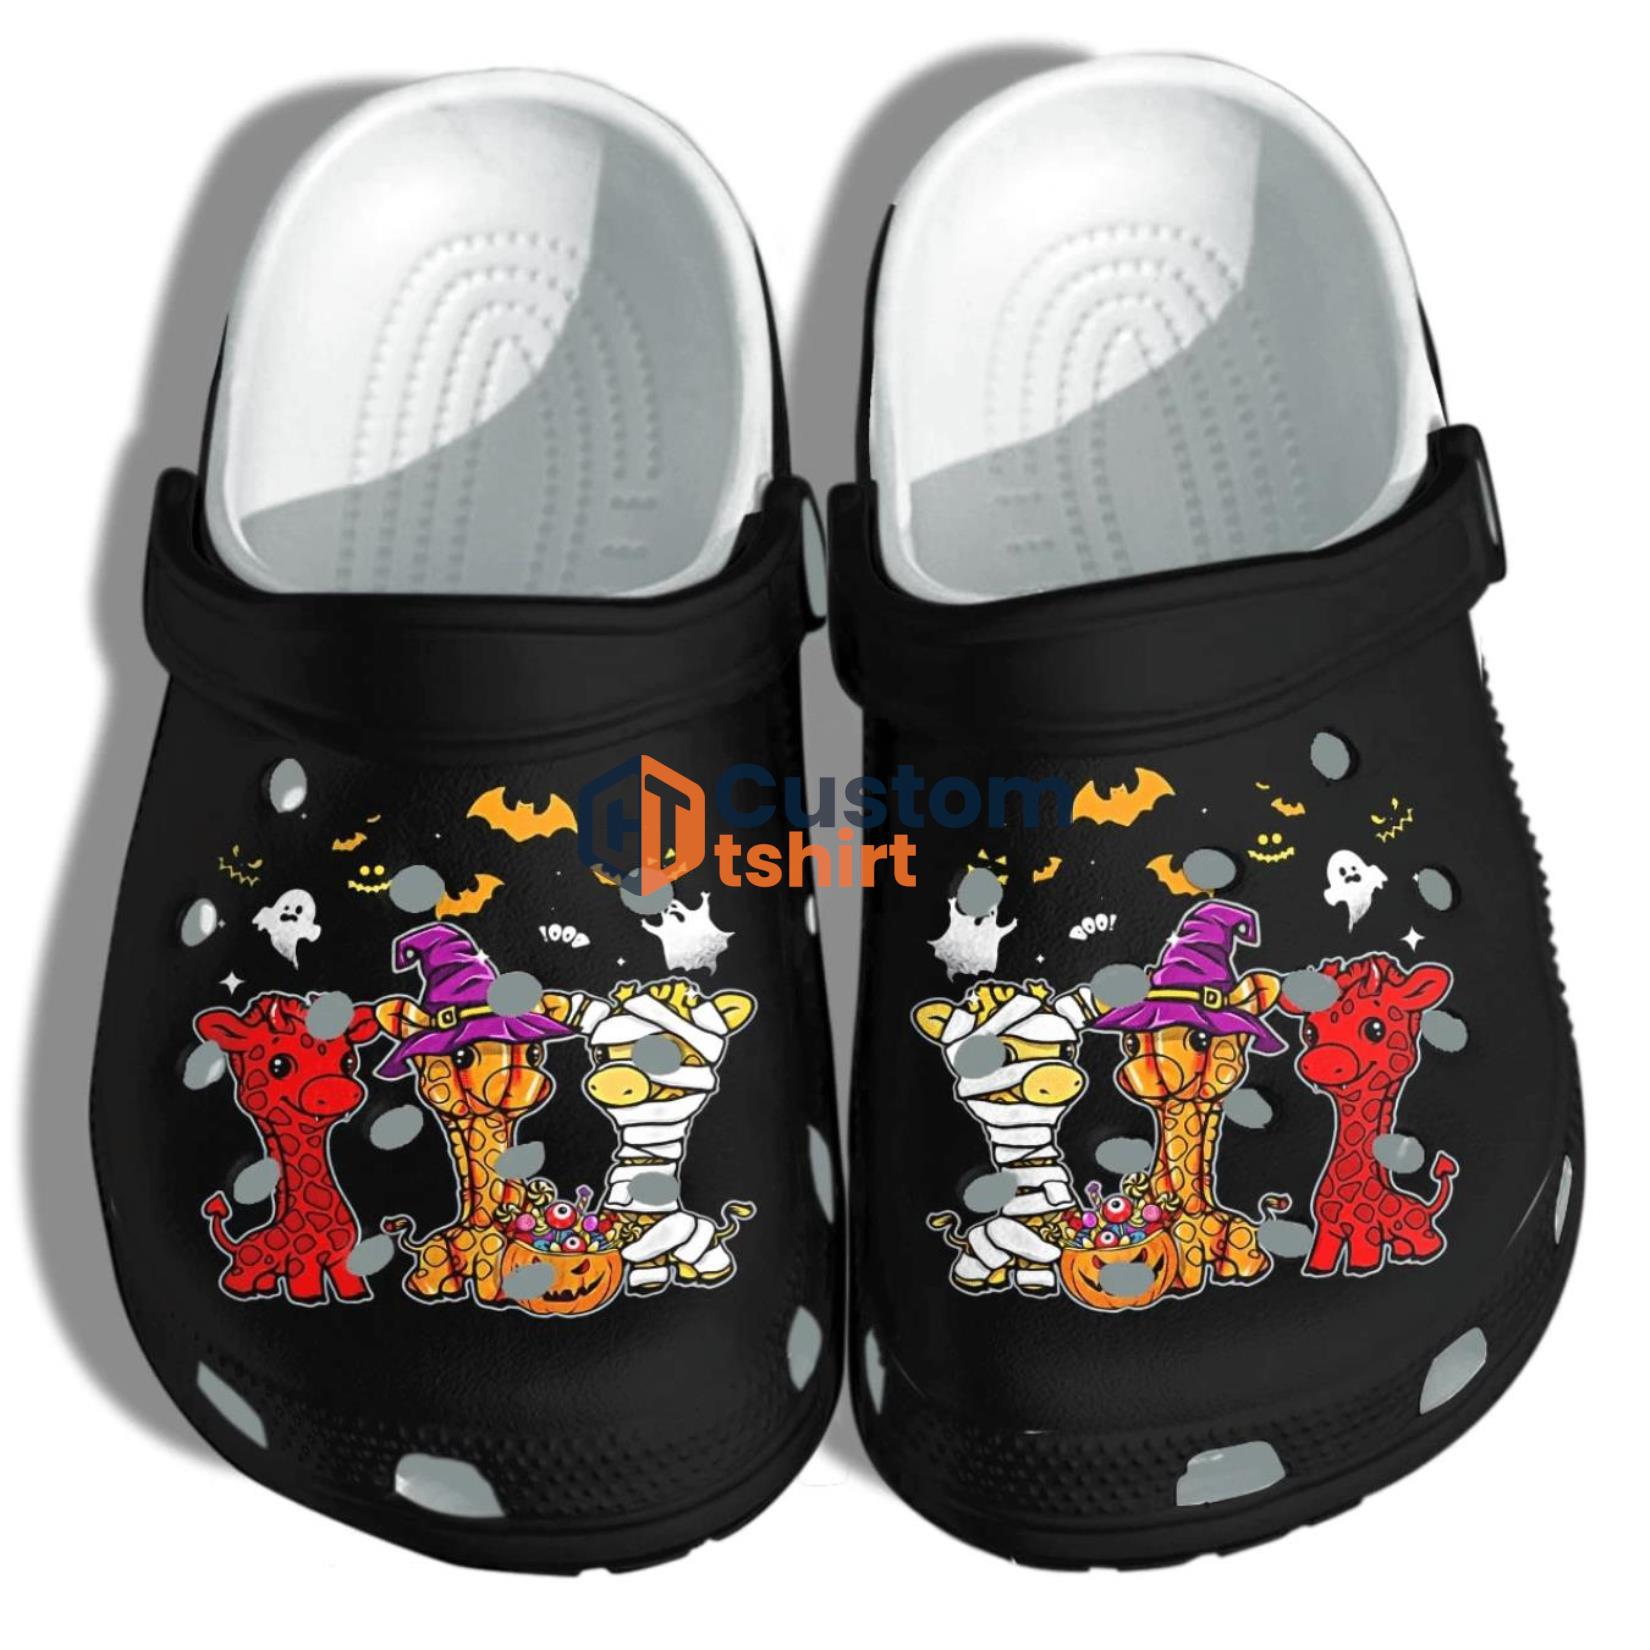 Little Giraffes Halloween Cosplay Witch Mummy Clog Shoes - Halloween Clog Shoes band Birthday Gift For Boy Girl qQ3 Product Photo 1 Product photo 1